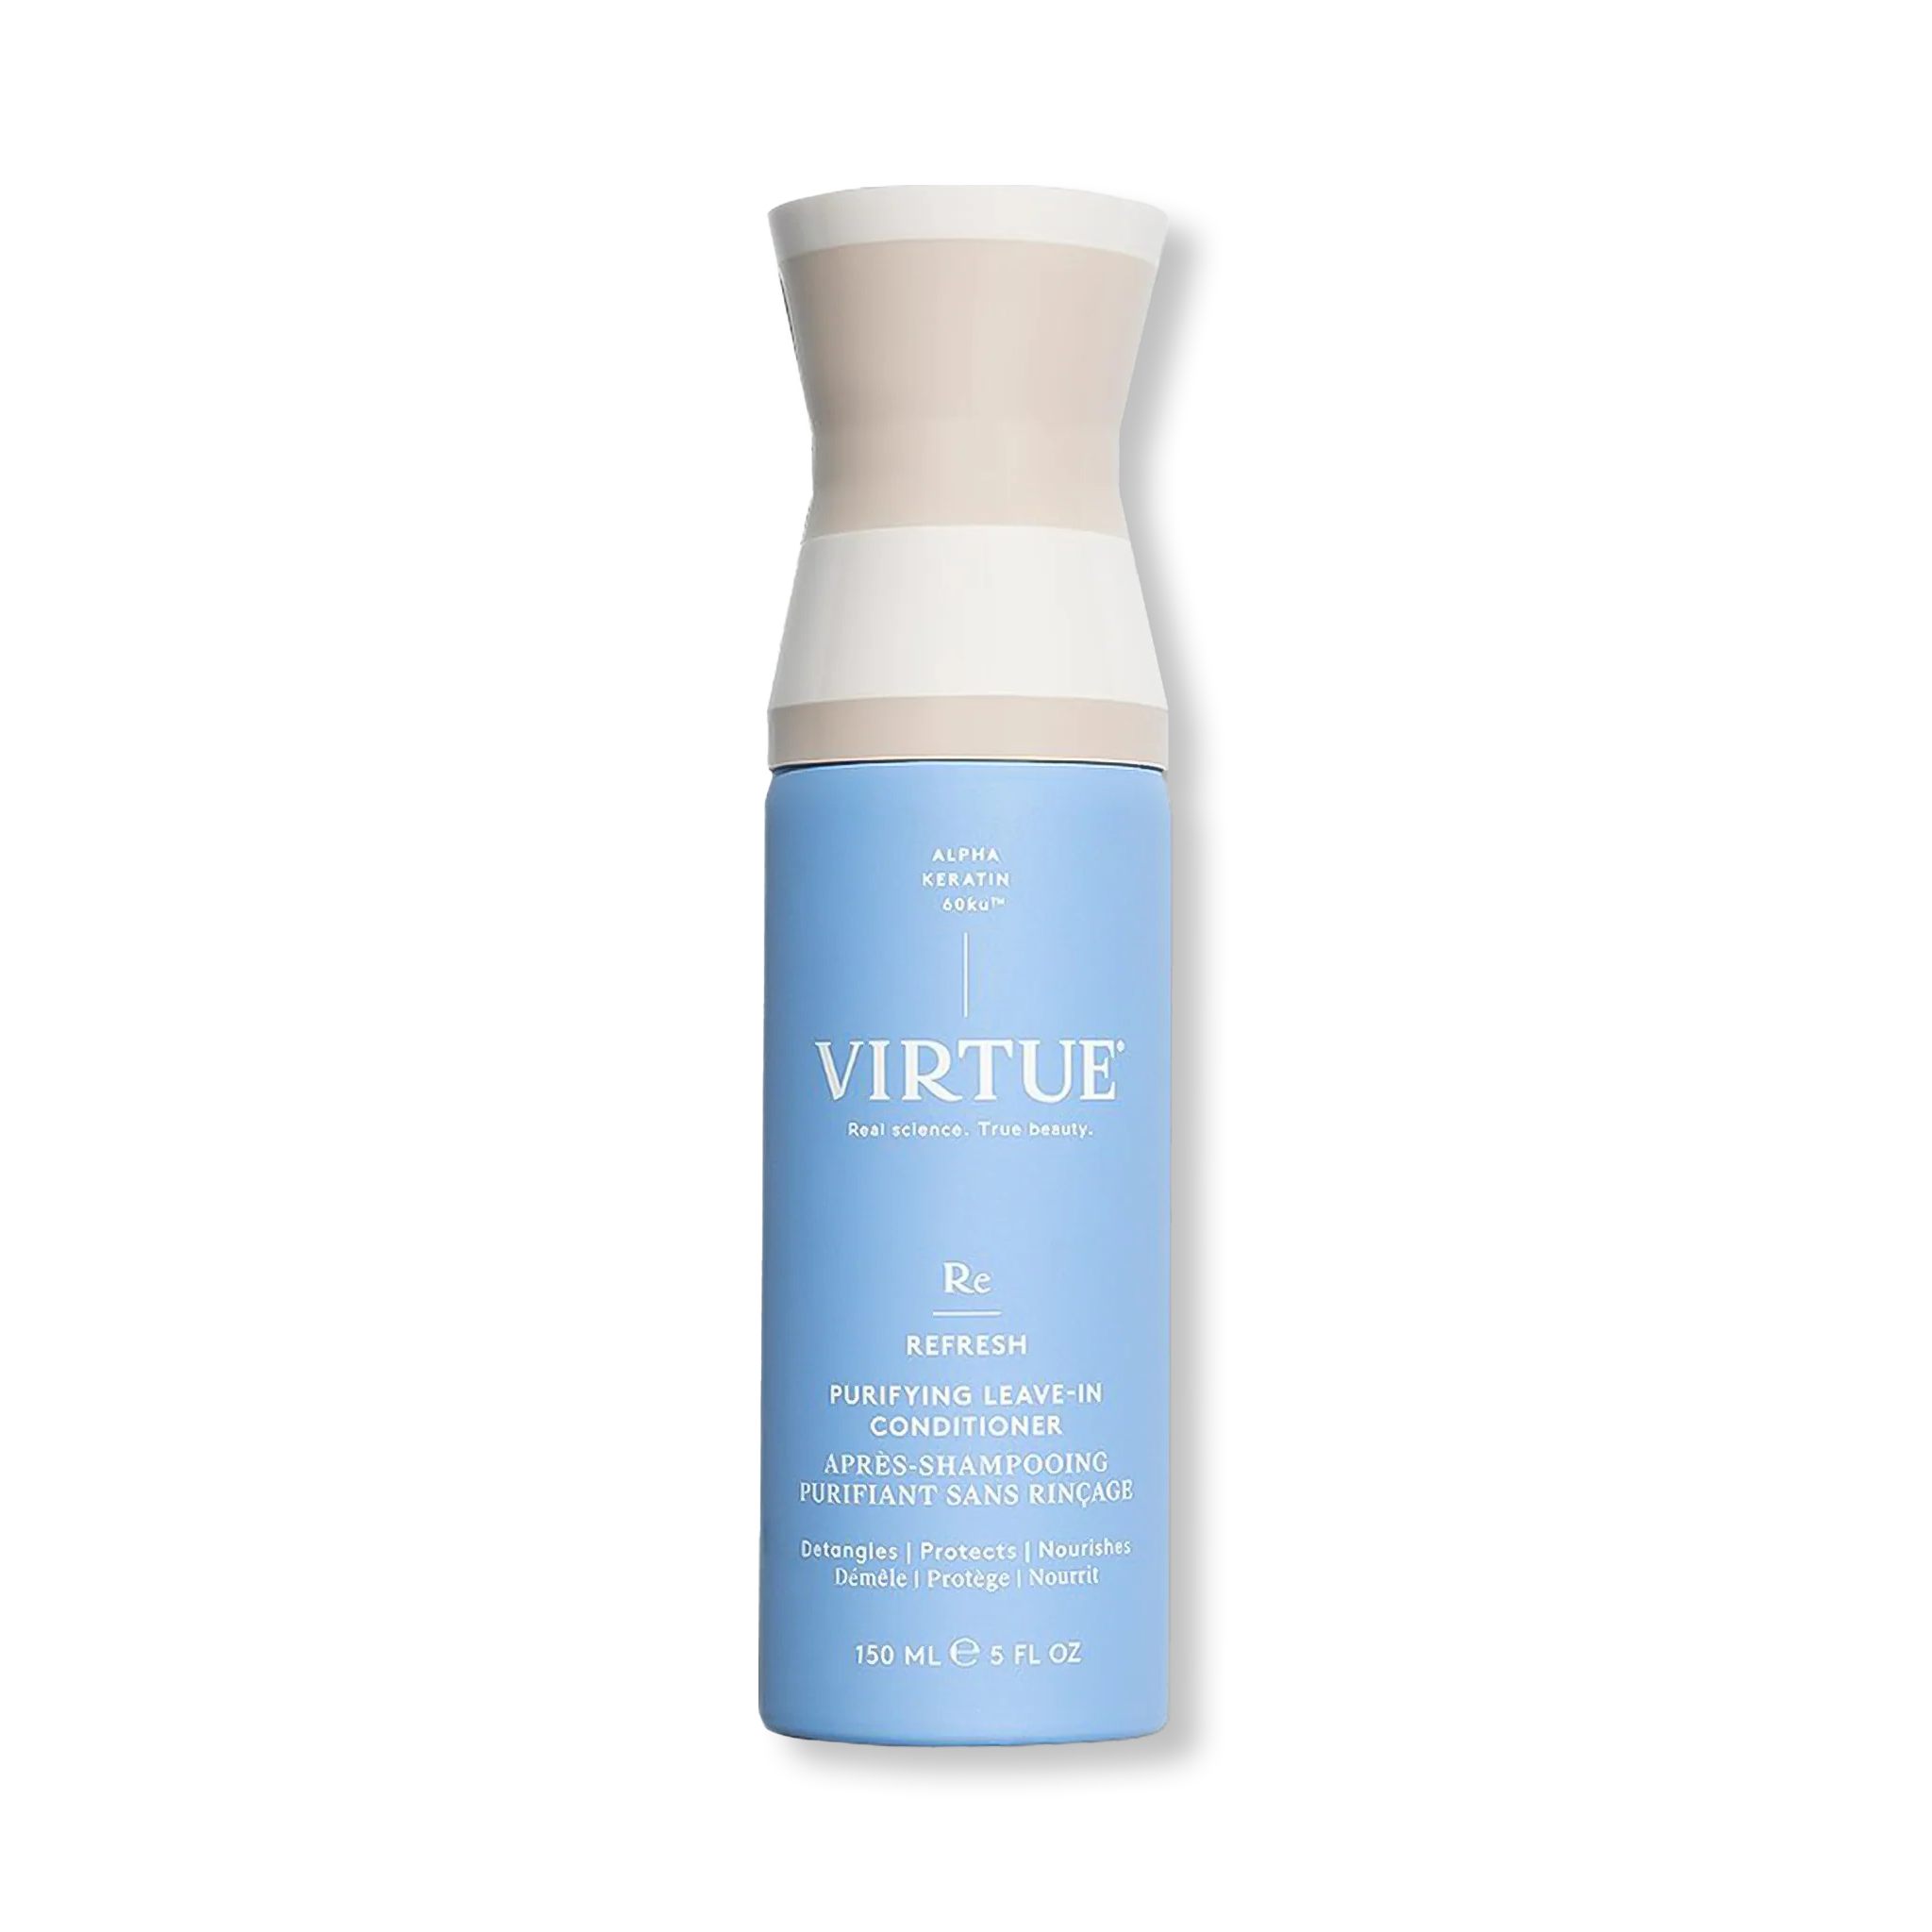 Virtue Purifying Leave In Conditioner